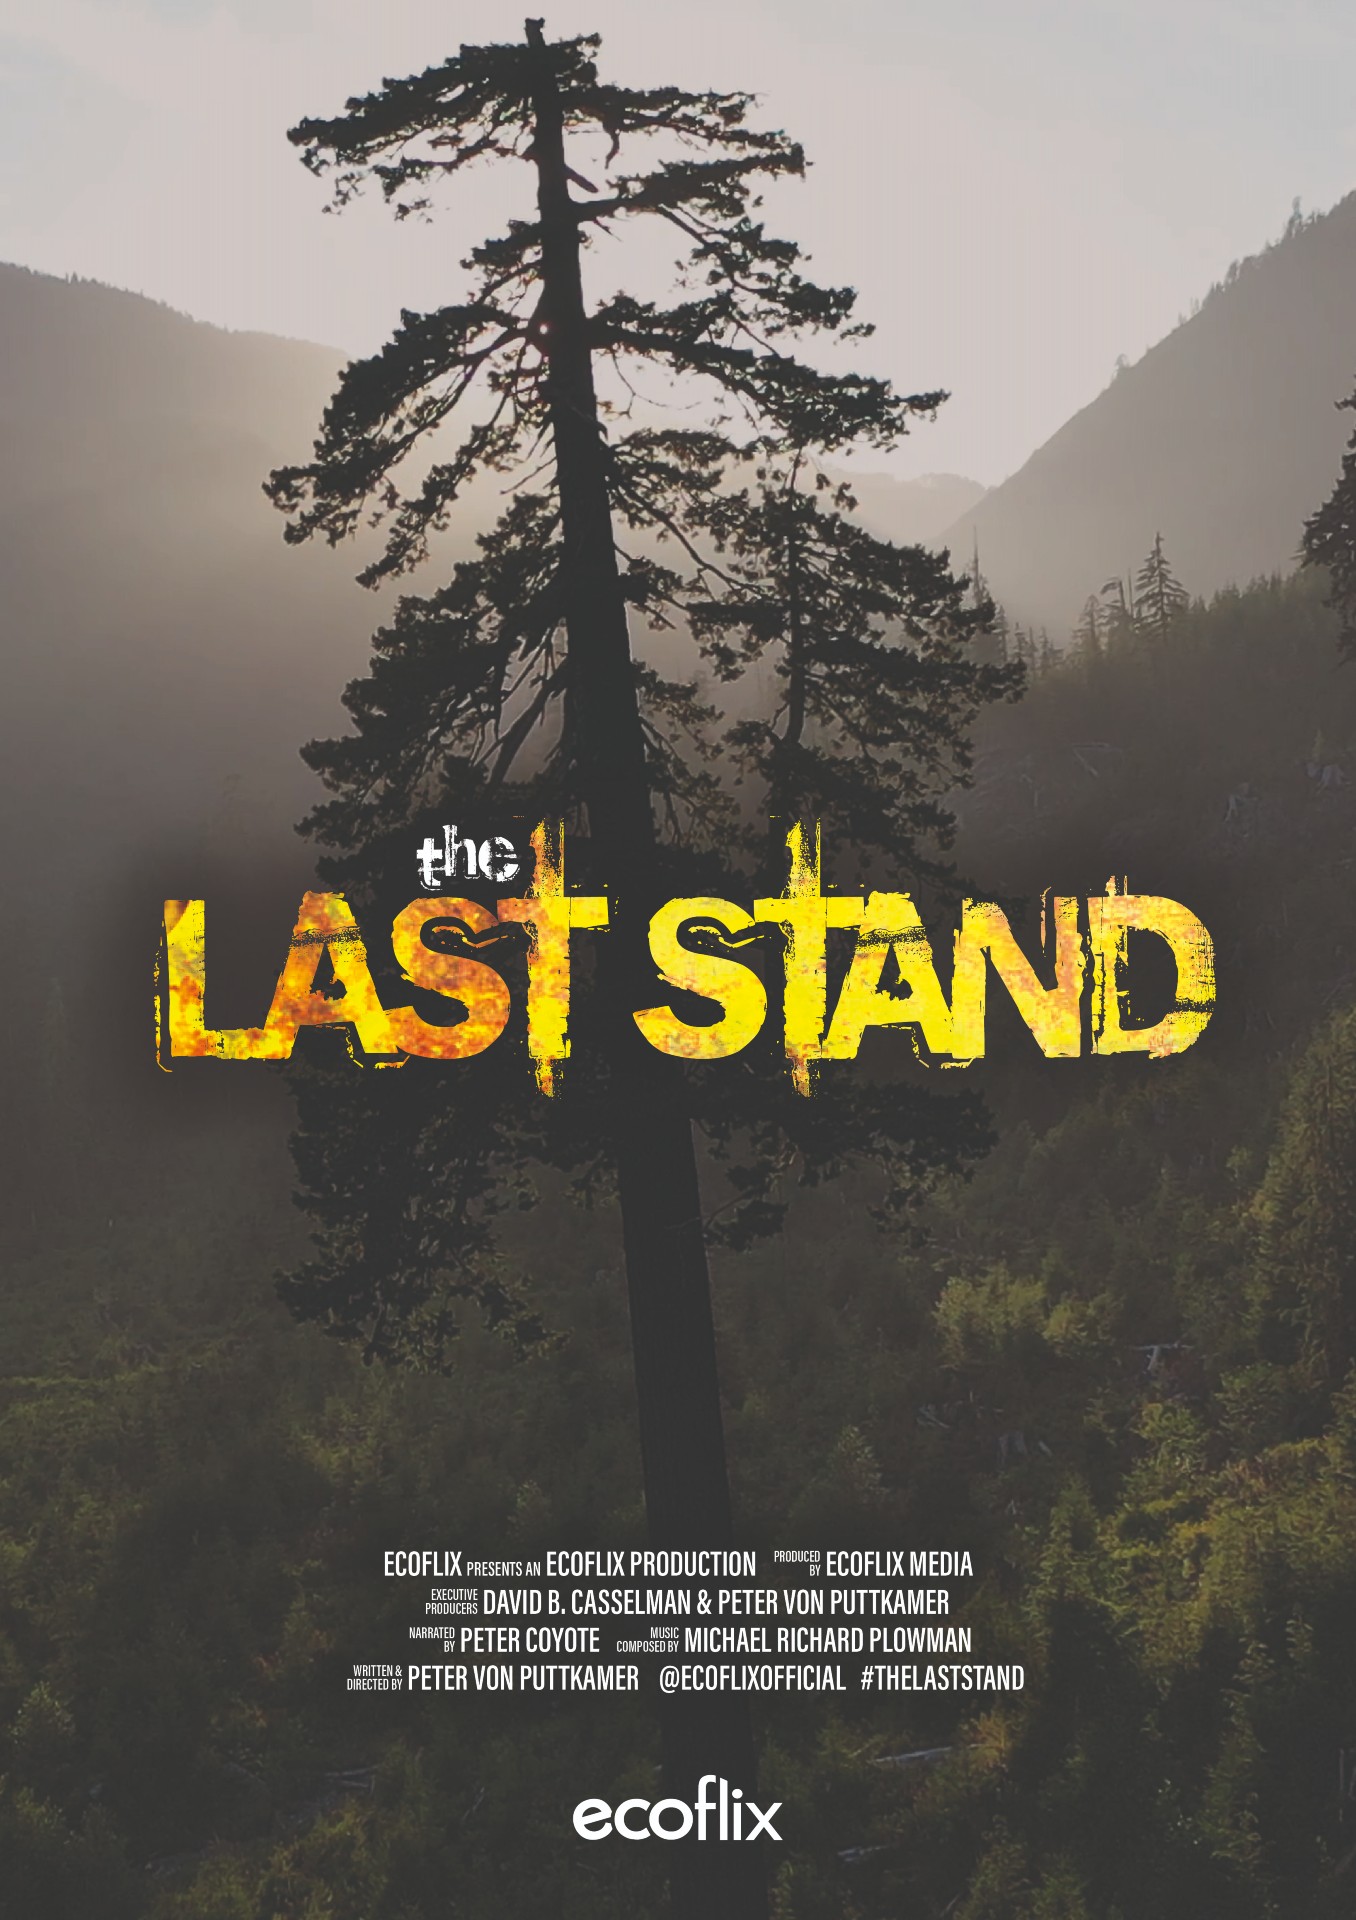 The Last Stand film poster [Image: Ecoflix]